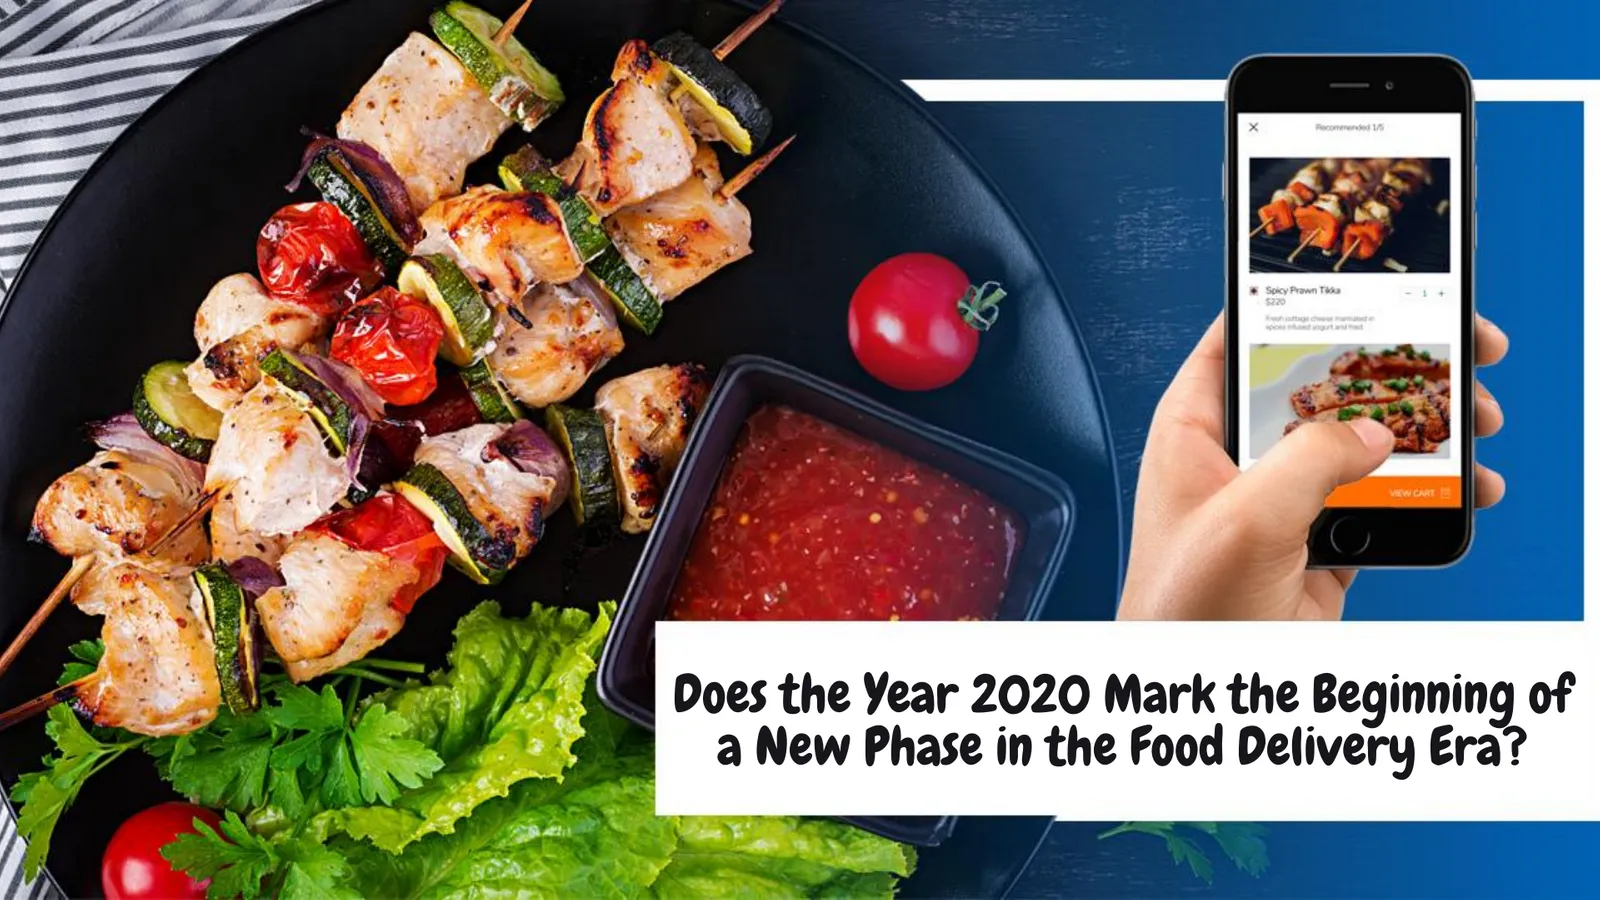 Does The Year 2020 Mark The Beginning Of A New Phase In The Food Delivery Era? 